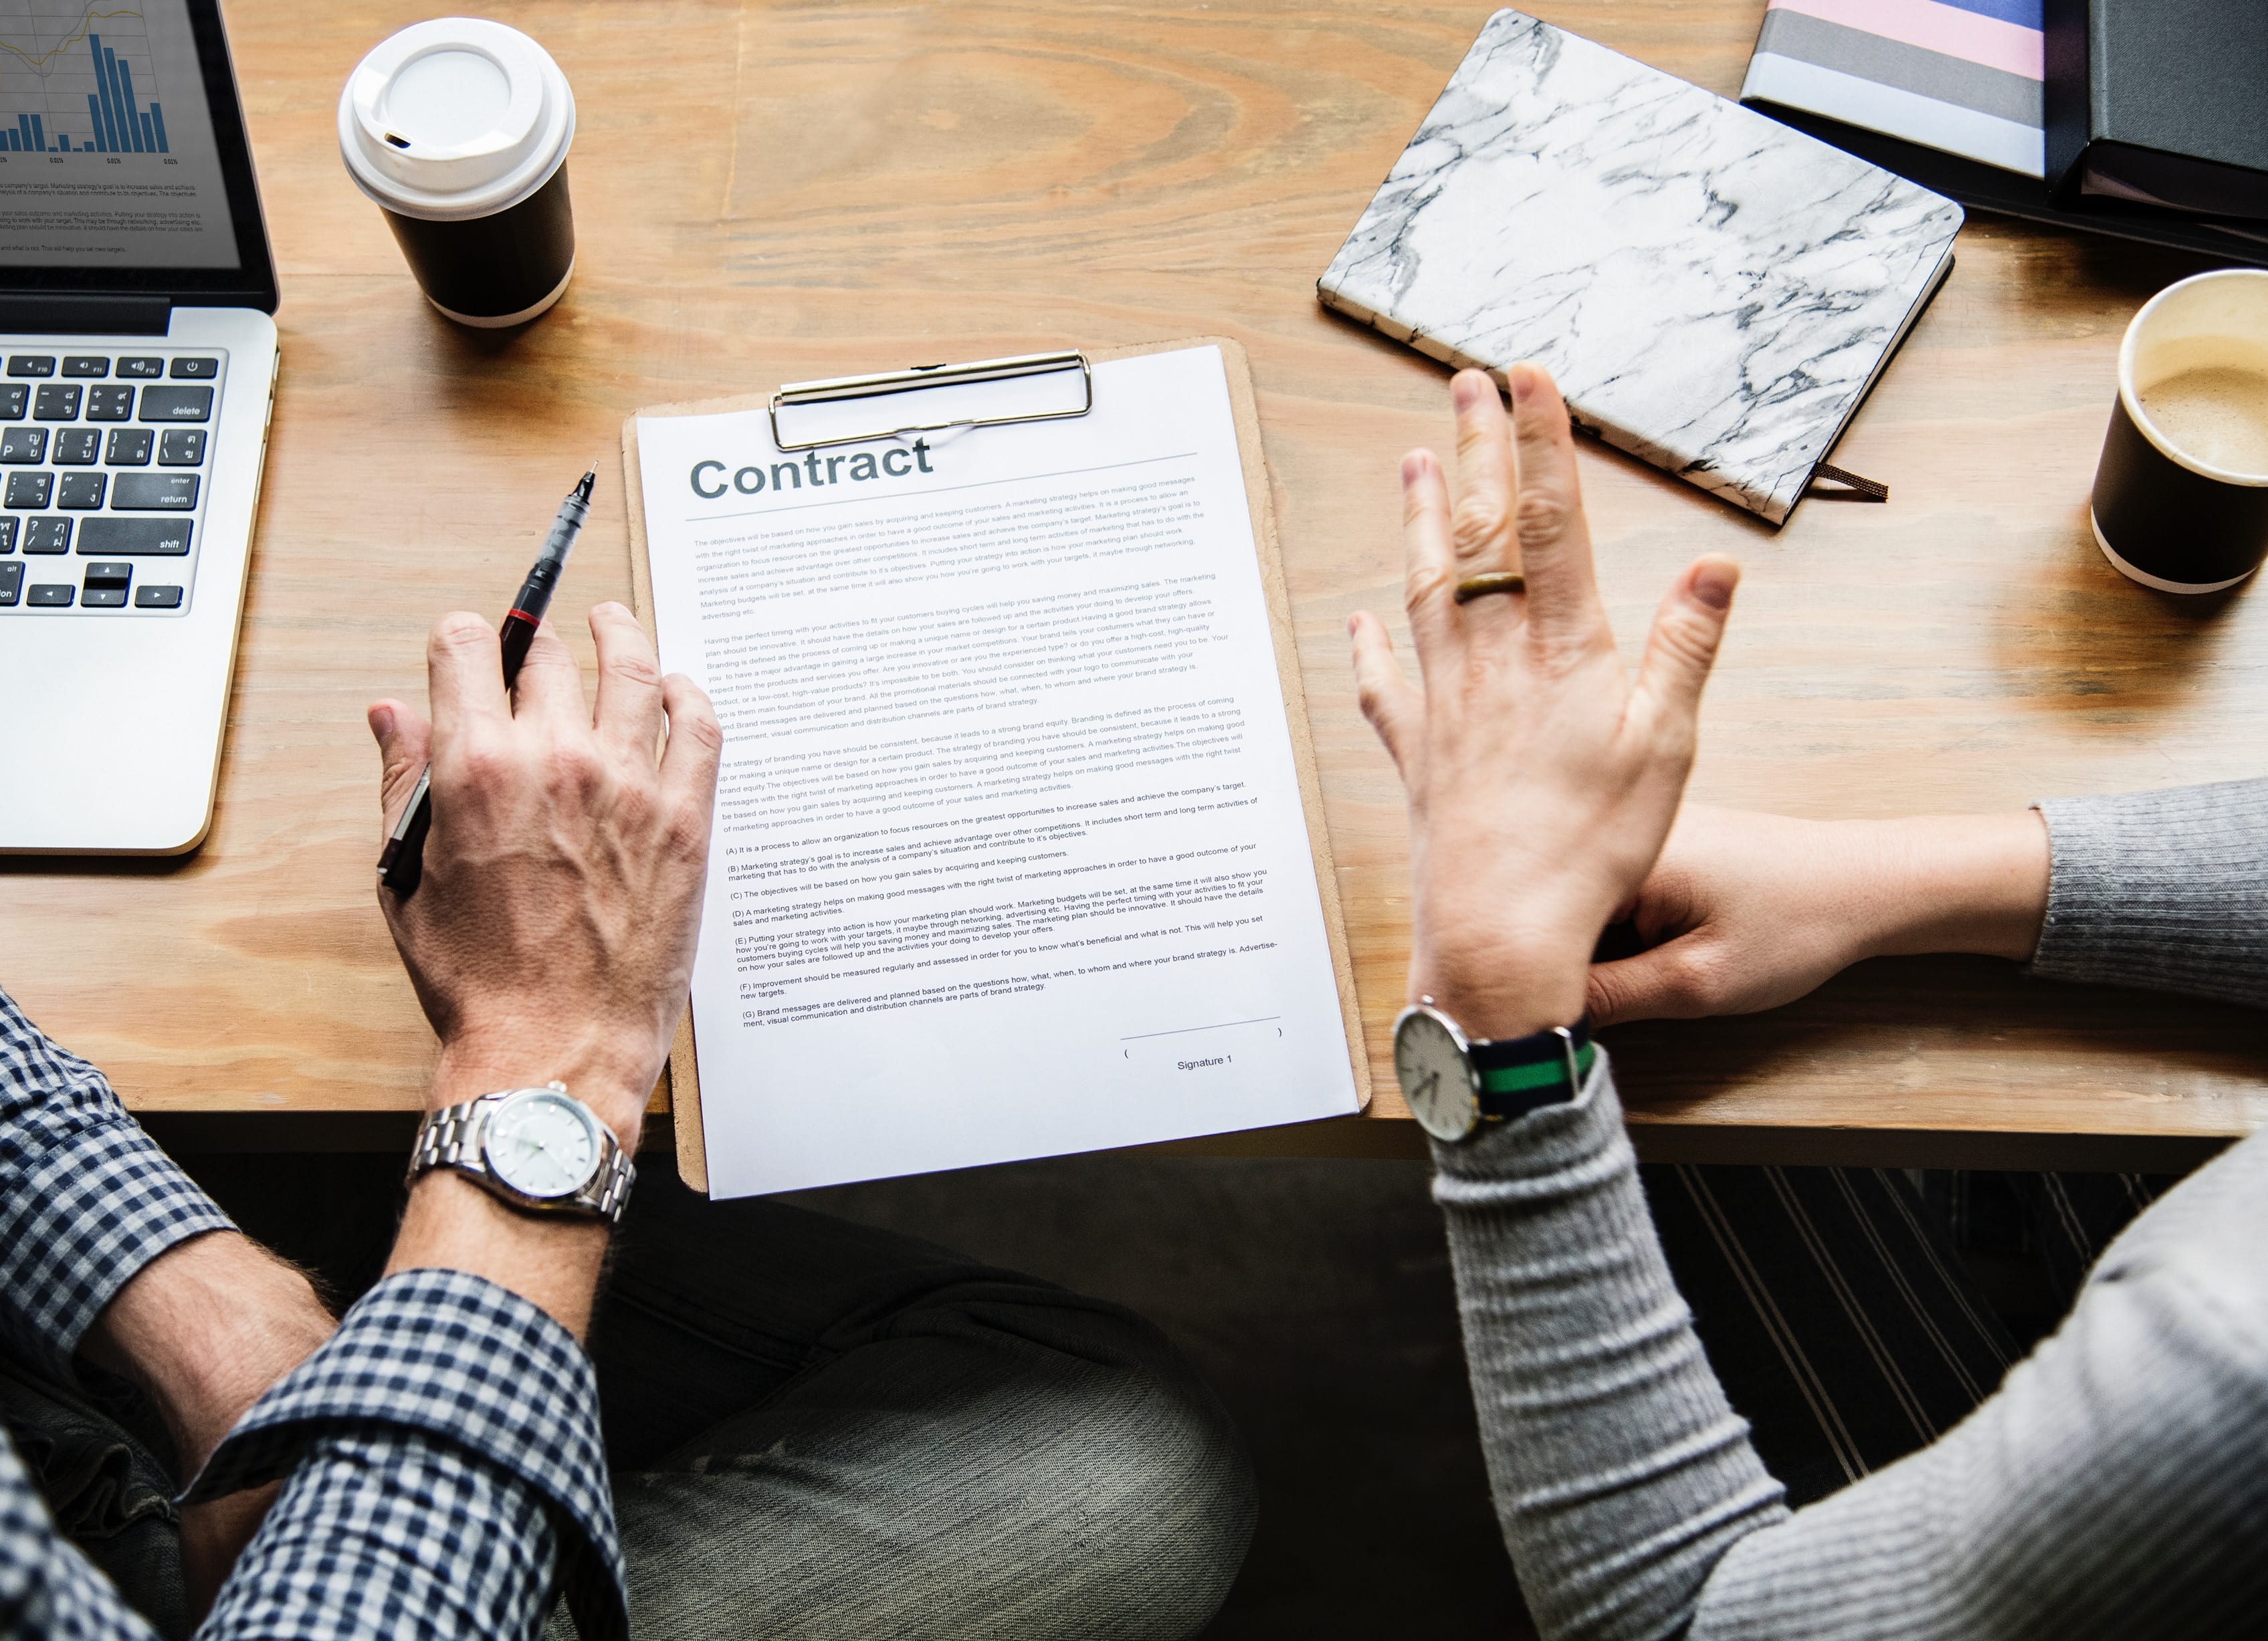 Two people reviewing a contract; image by Rawpixel, via Unsplash.com.